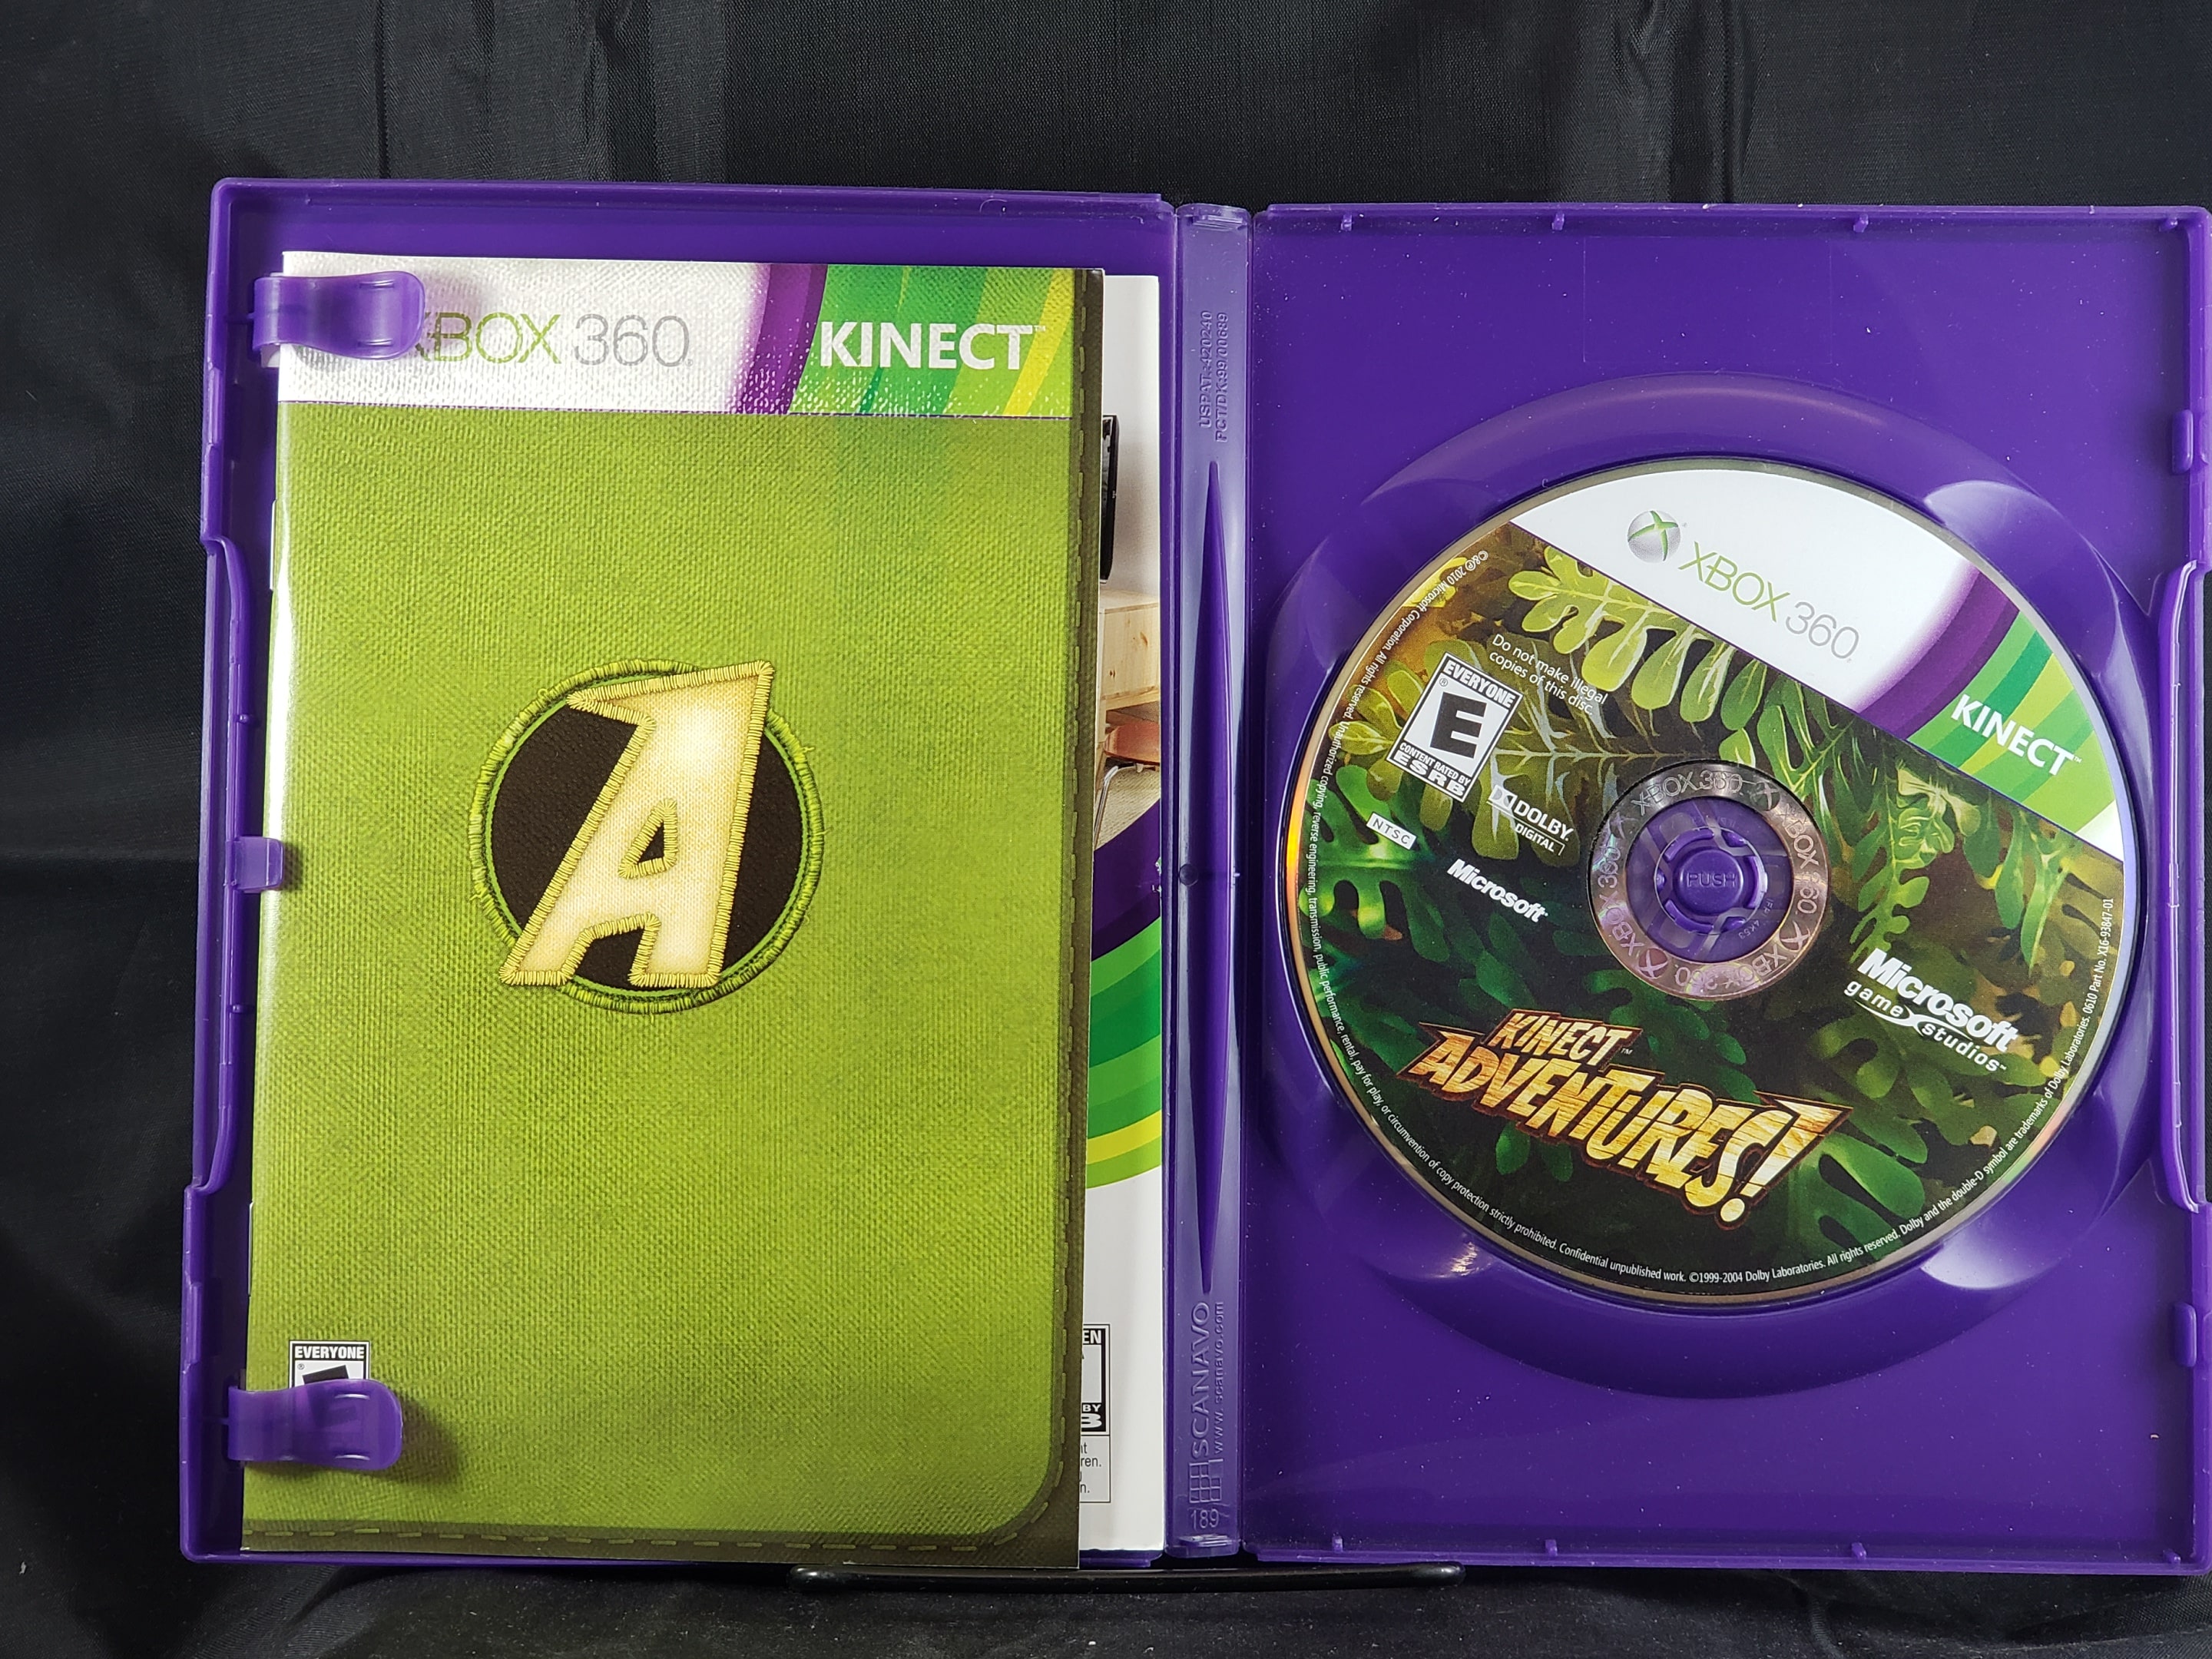 Kinect Adventures XBOX 360 Japan Import US Seller